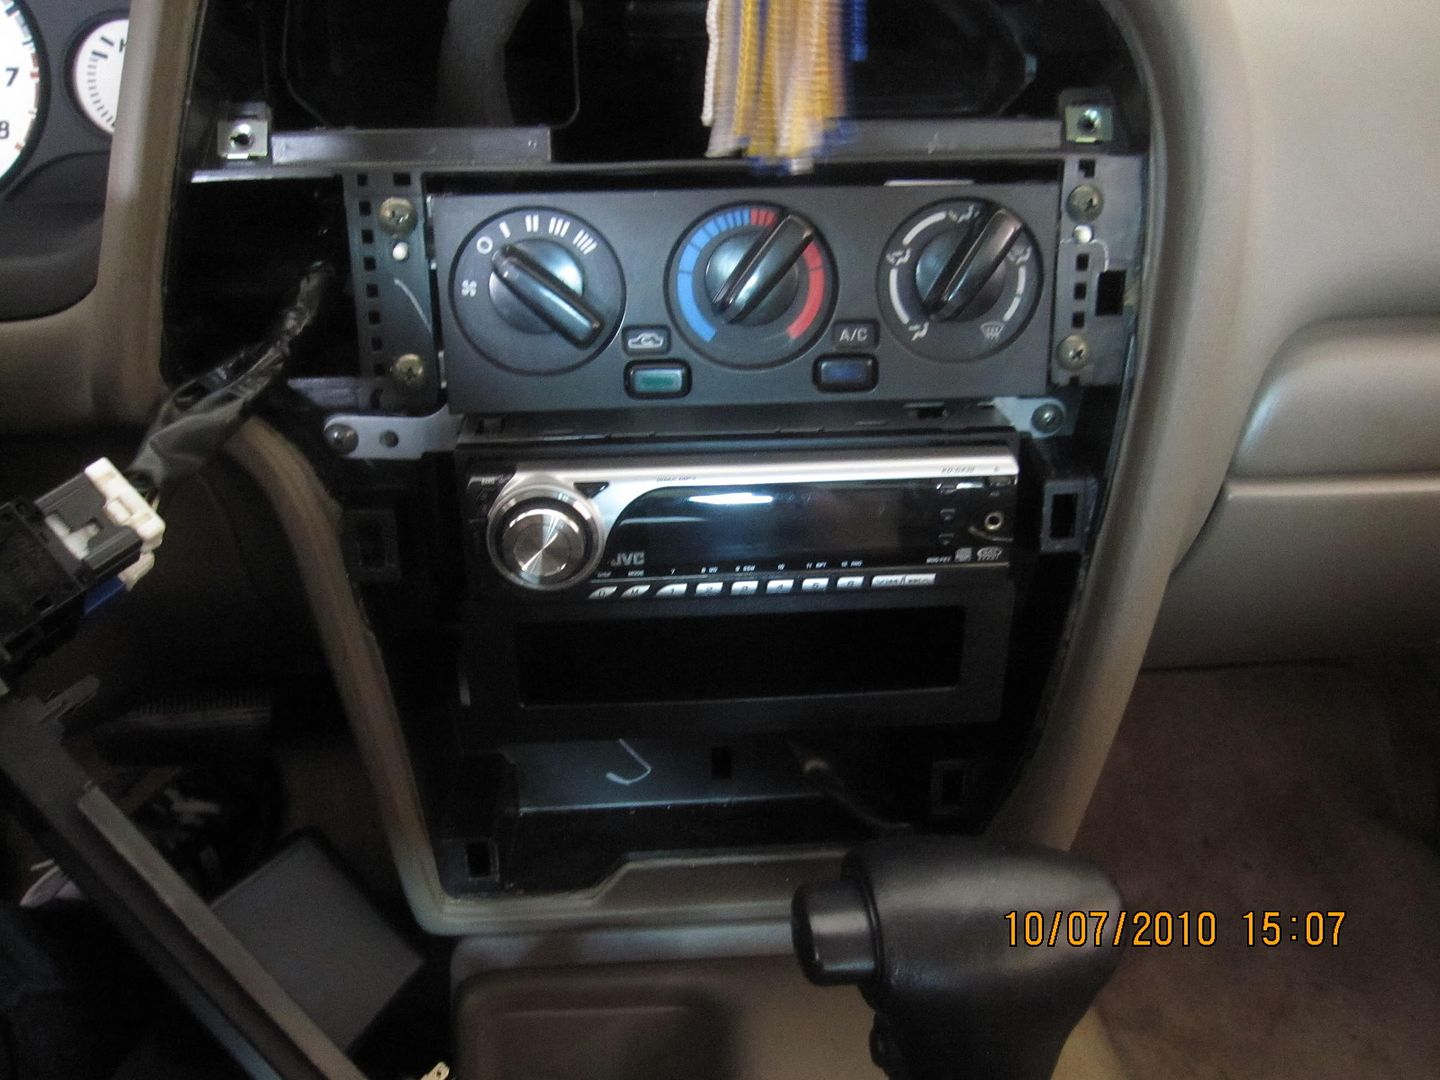 2004 Nissan pathfinder stereo removal #5